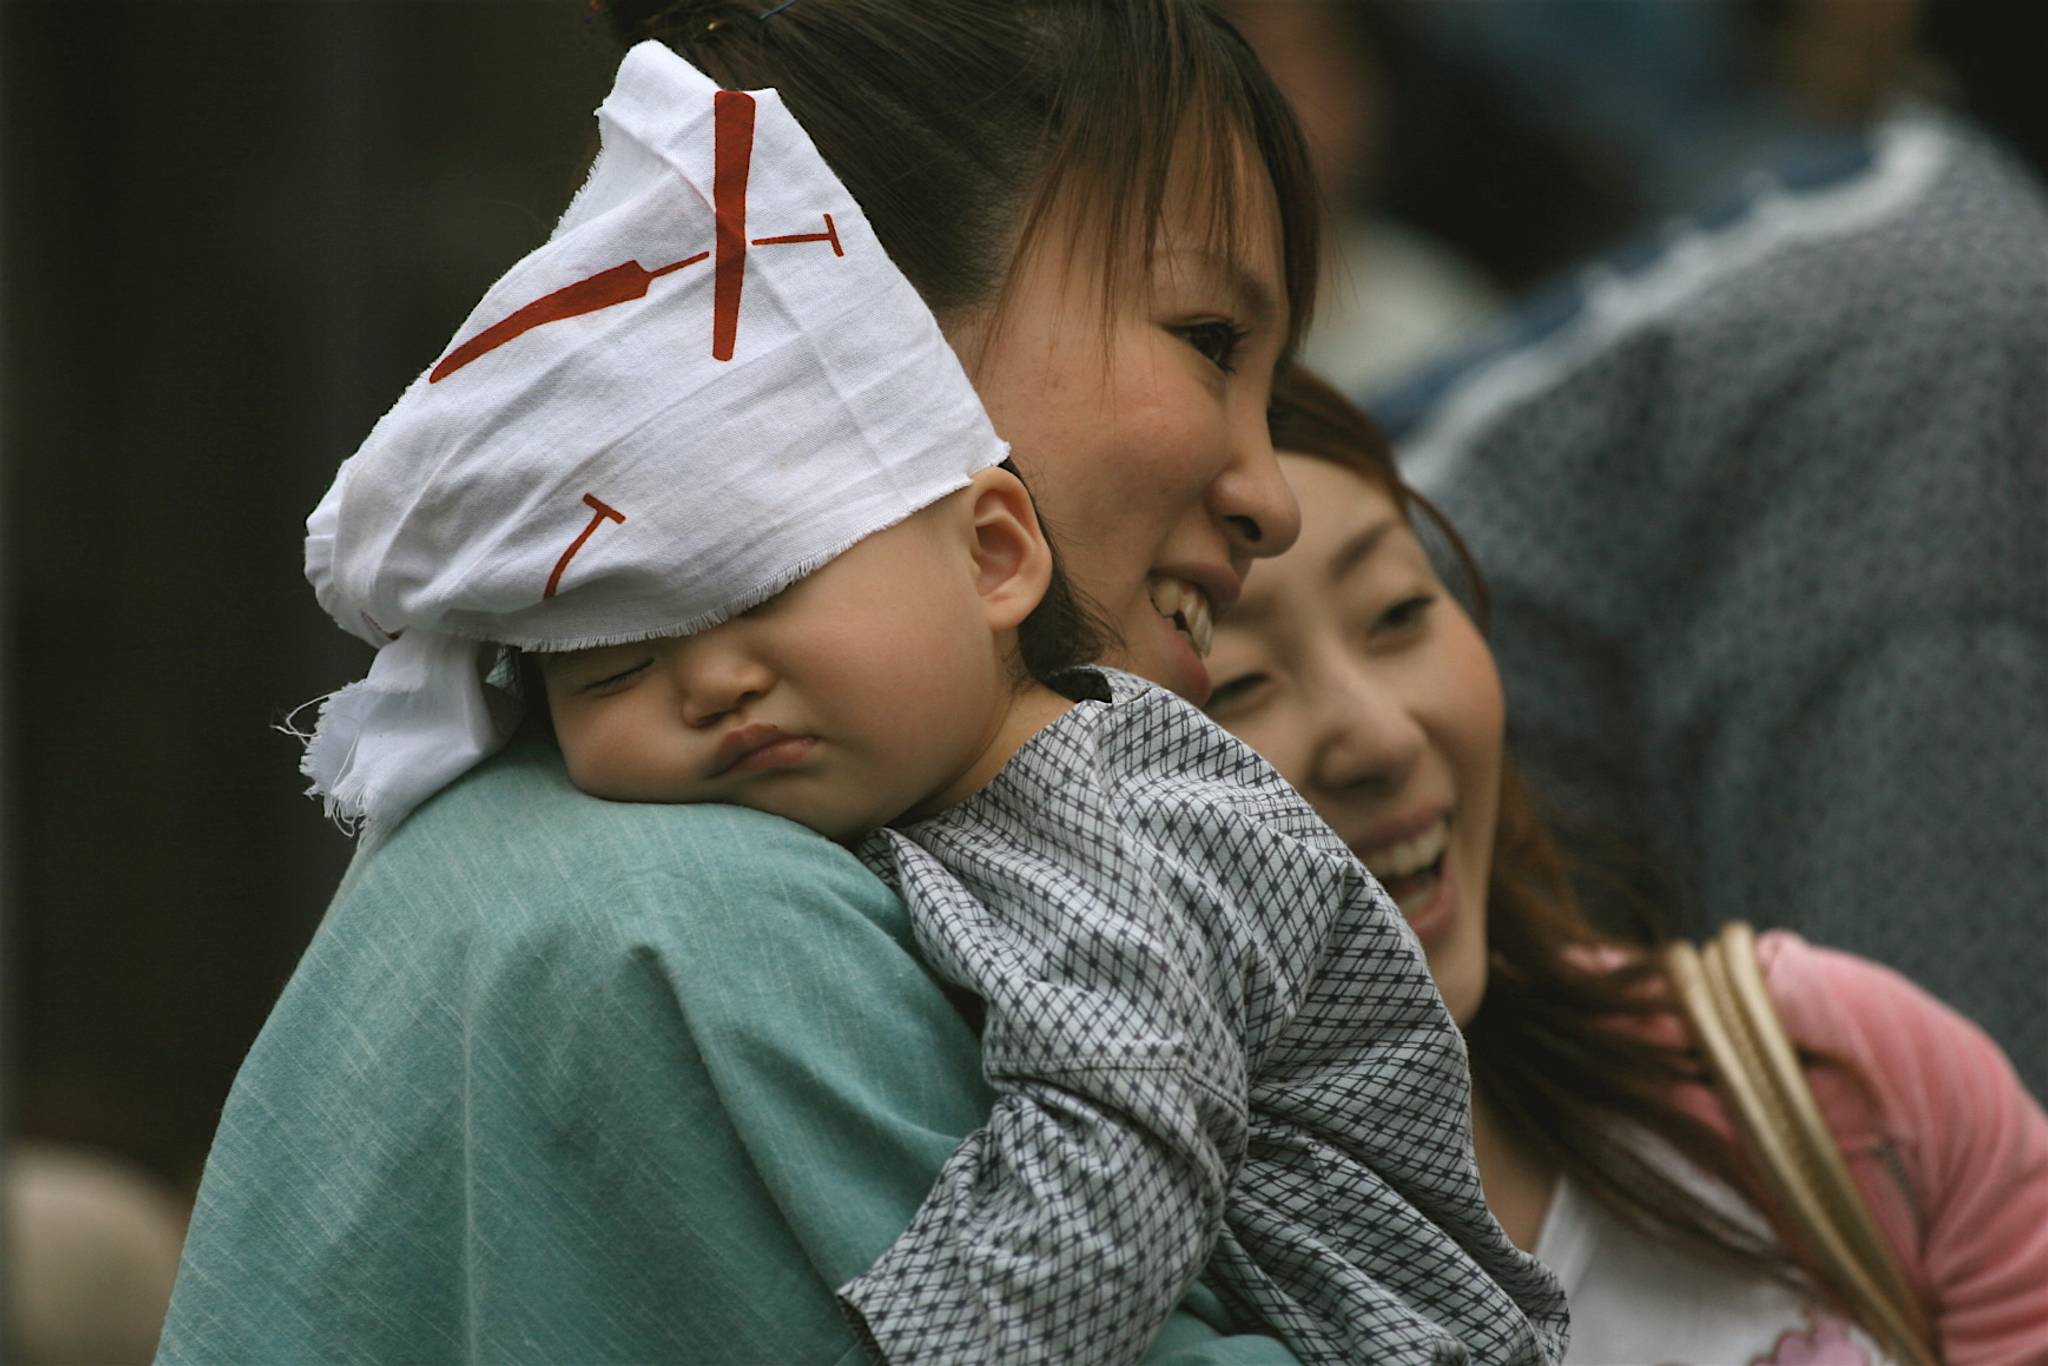 BabyMap finds baby-friendly facilities in Japan